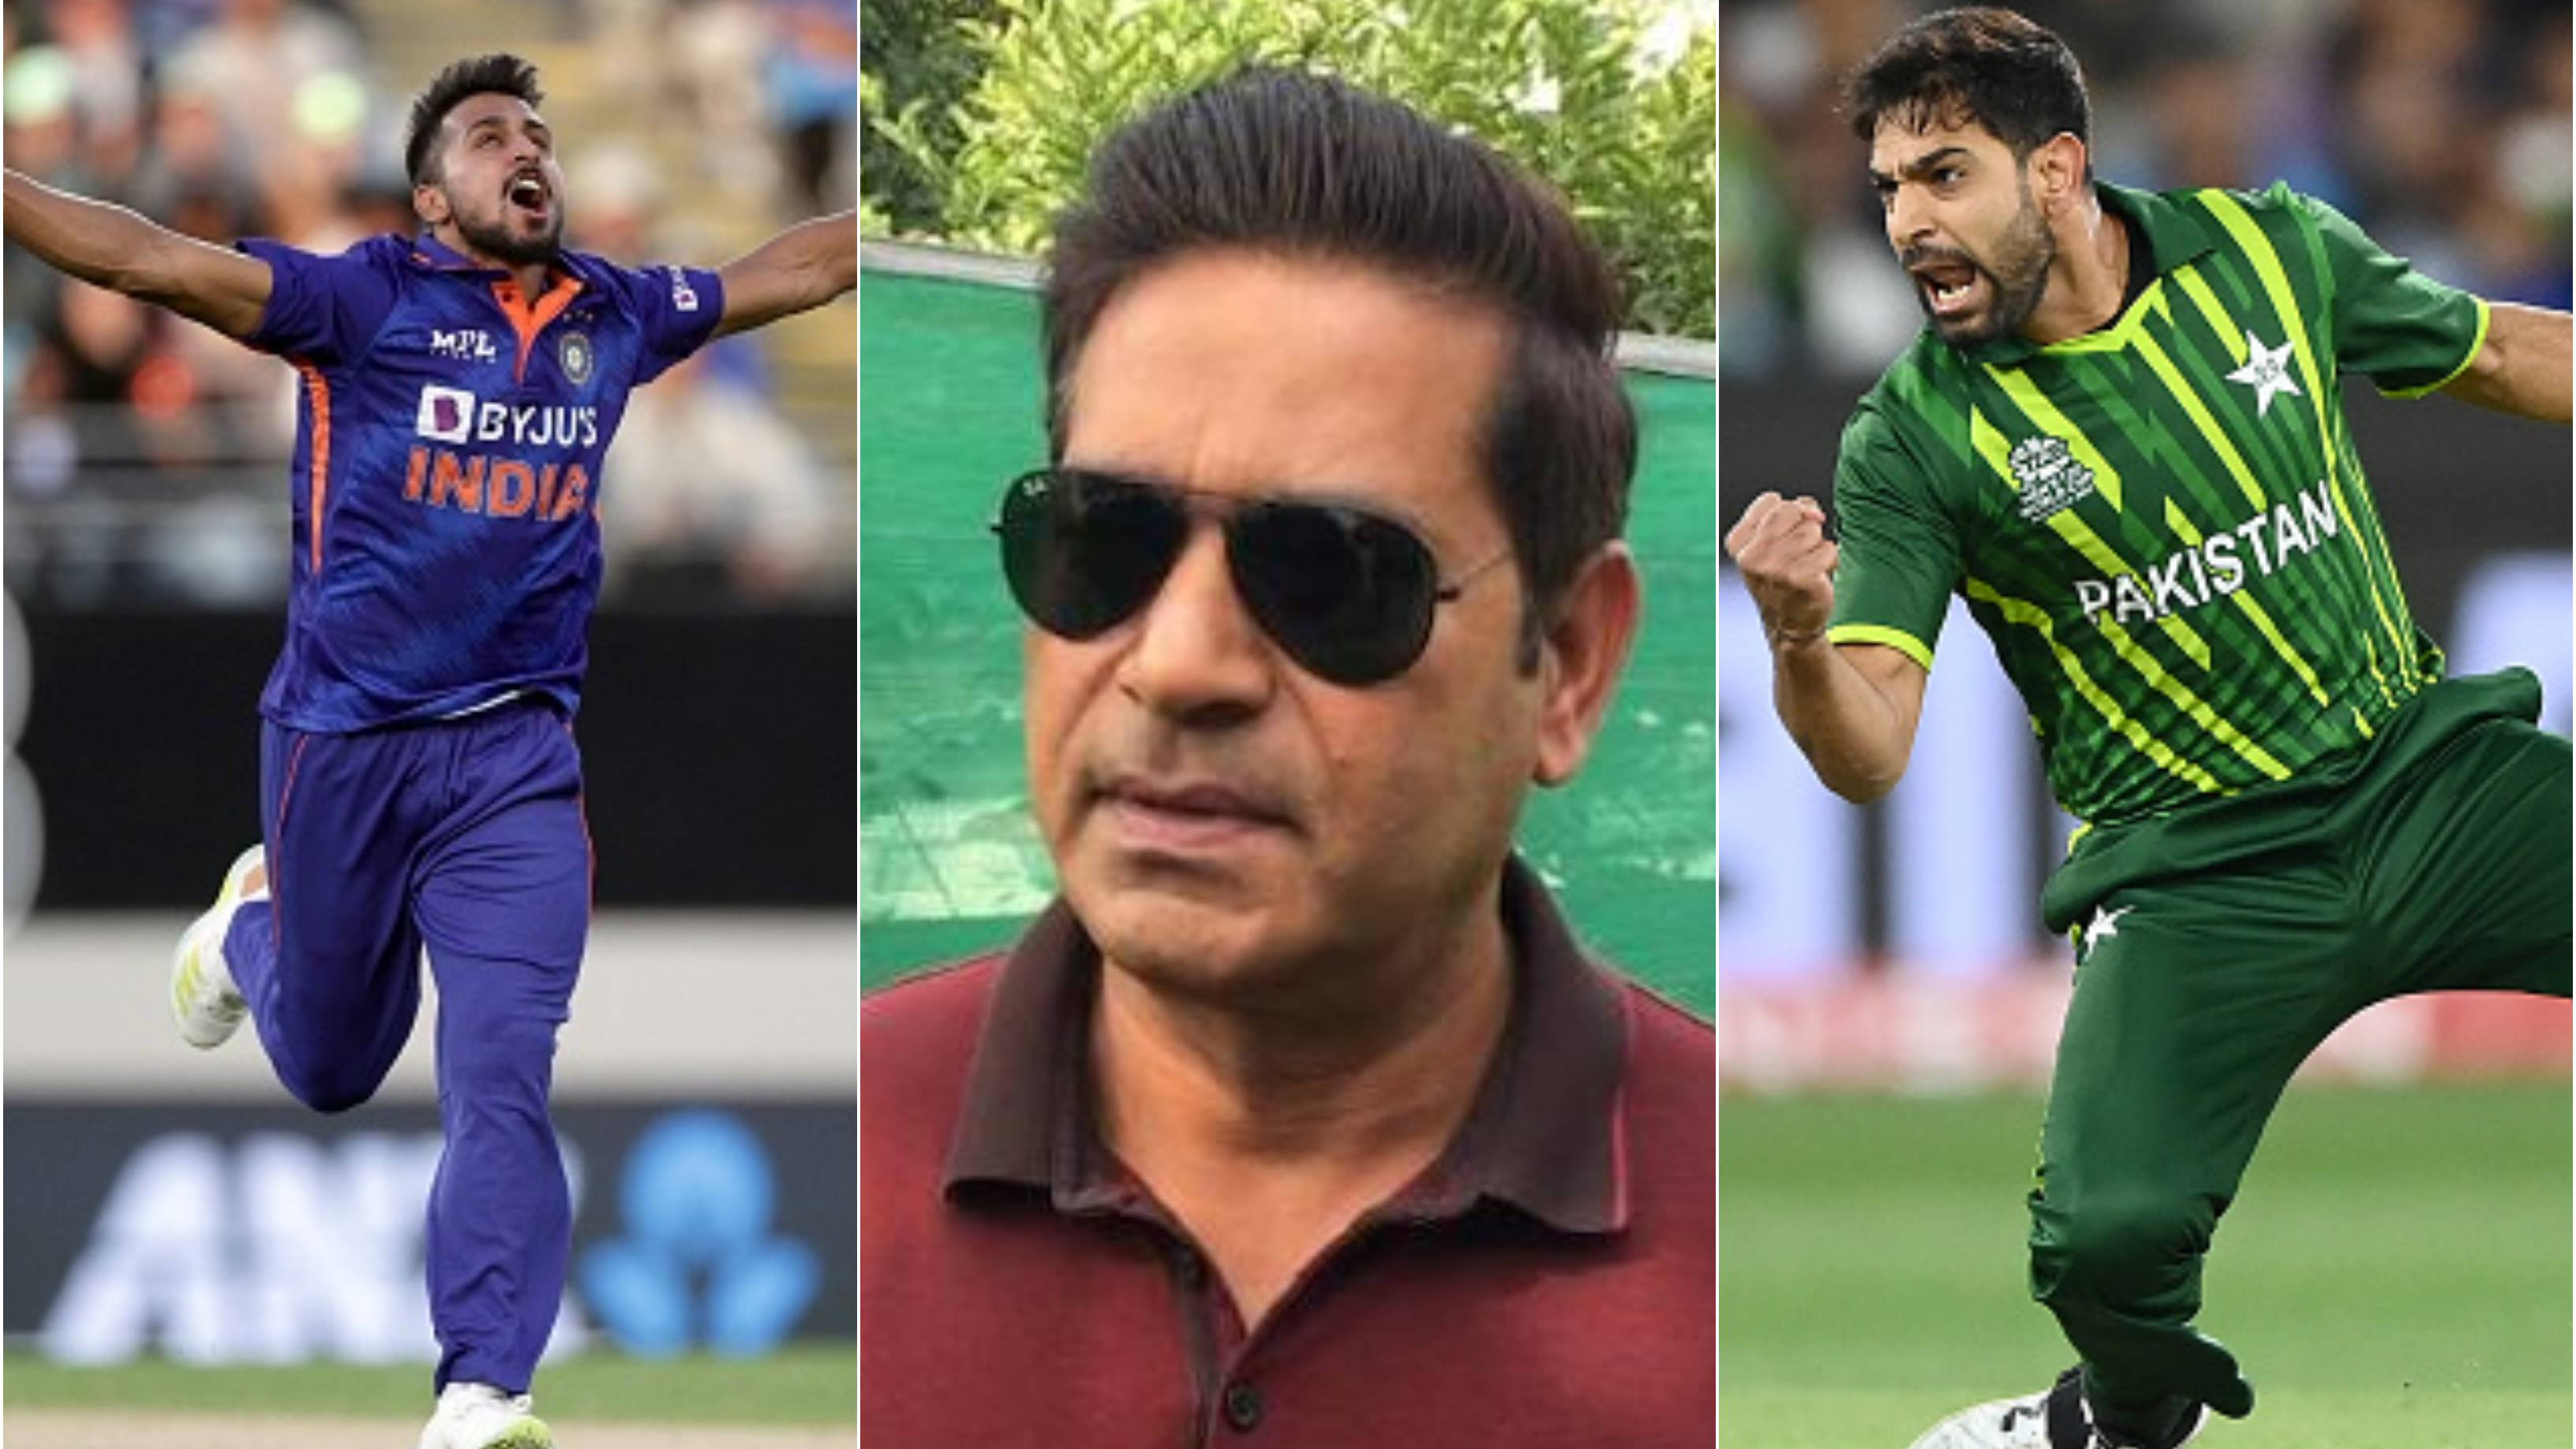 ‘Difference is same as it is between Kohli and rest of the batters’: Aaqib Javed on Umran Malik vs Haris Rauf comparison